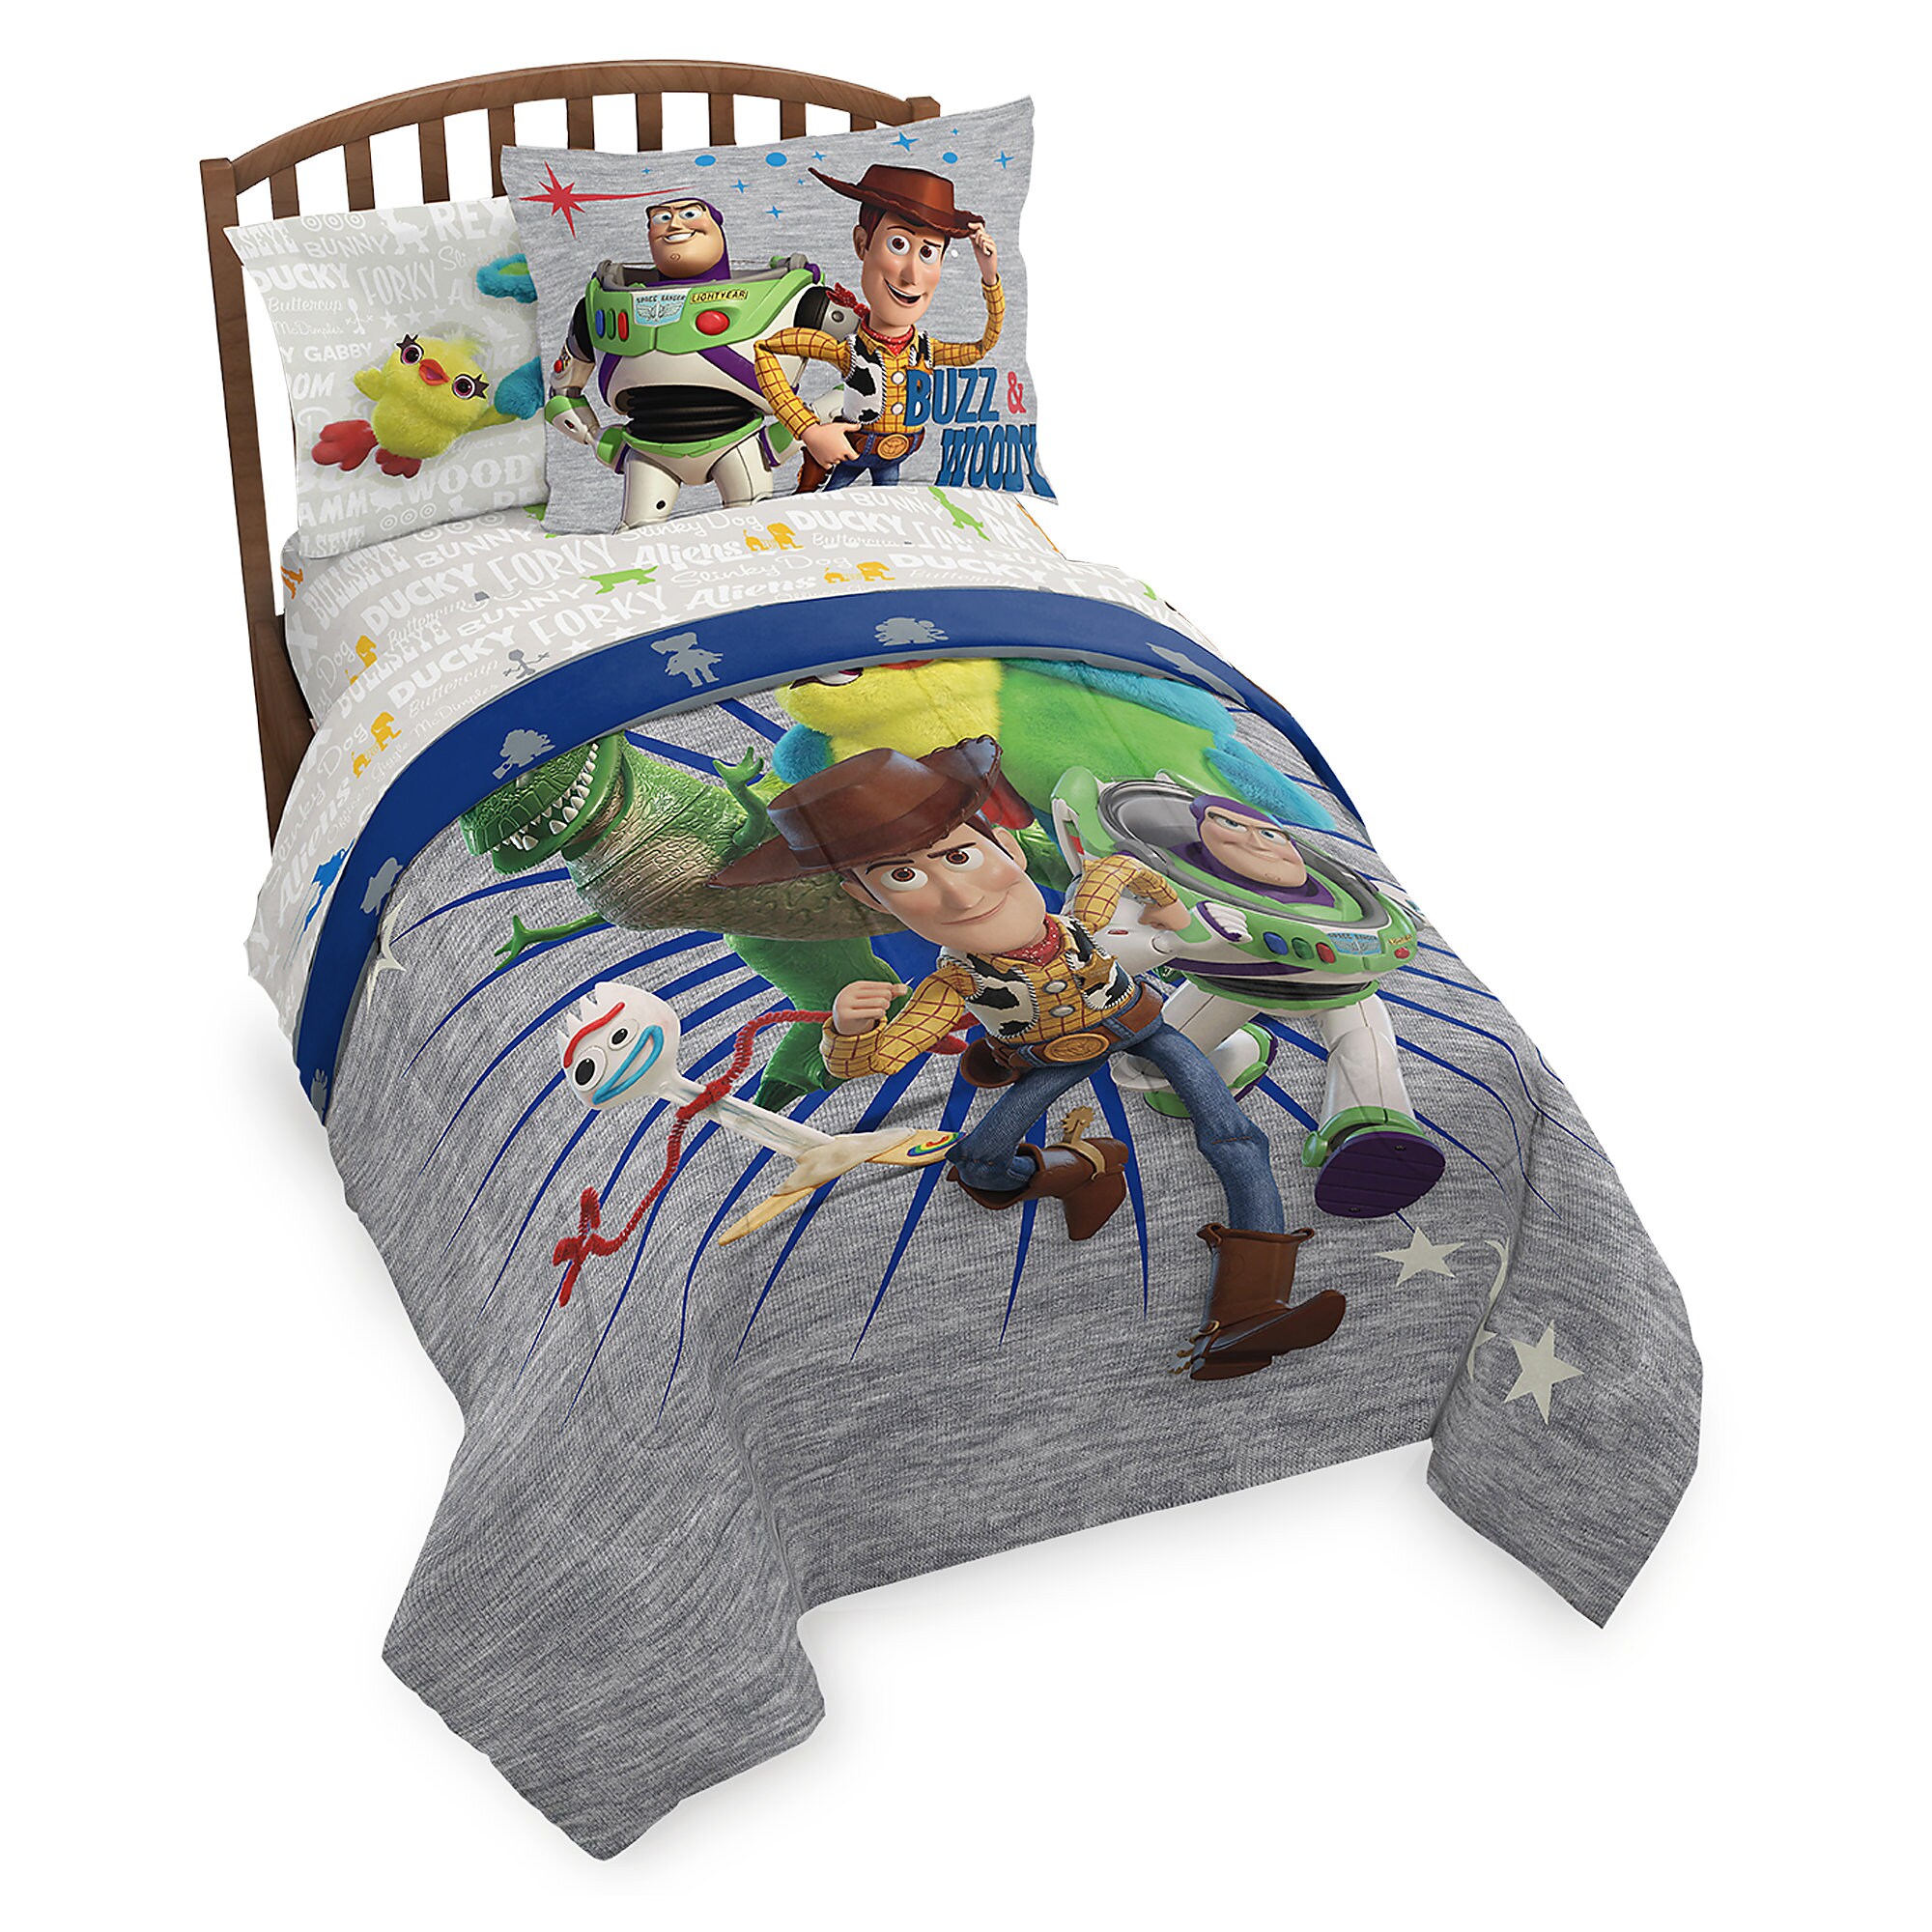 Toy Story 4 Comforter Set - Twin / Full